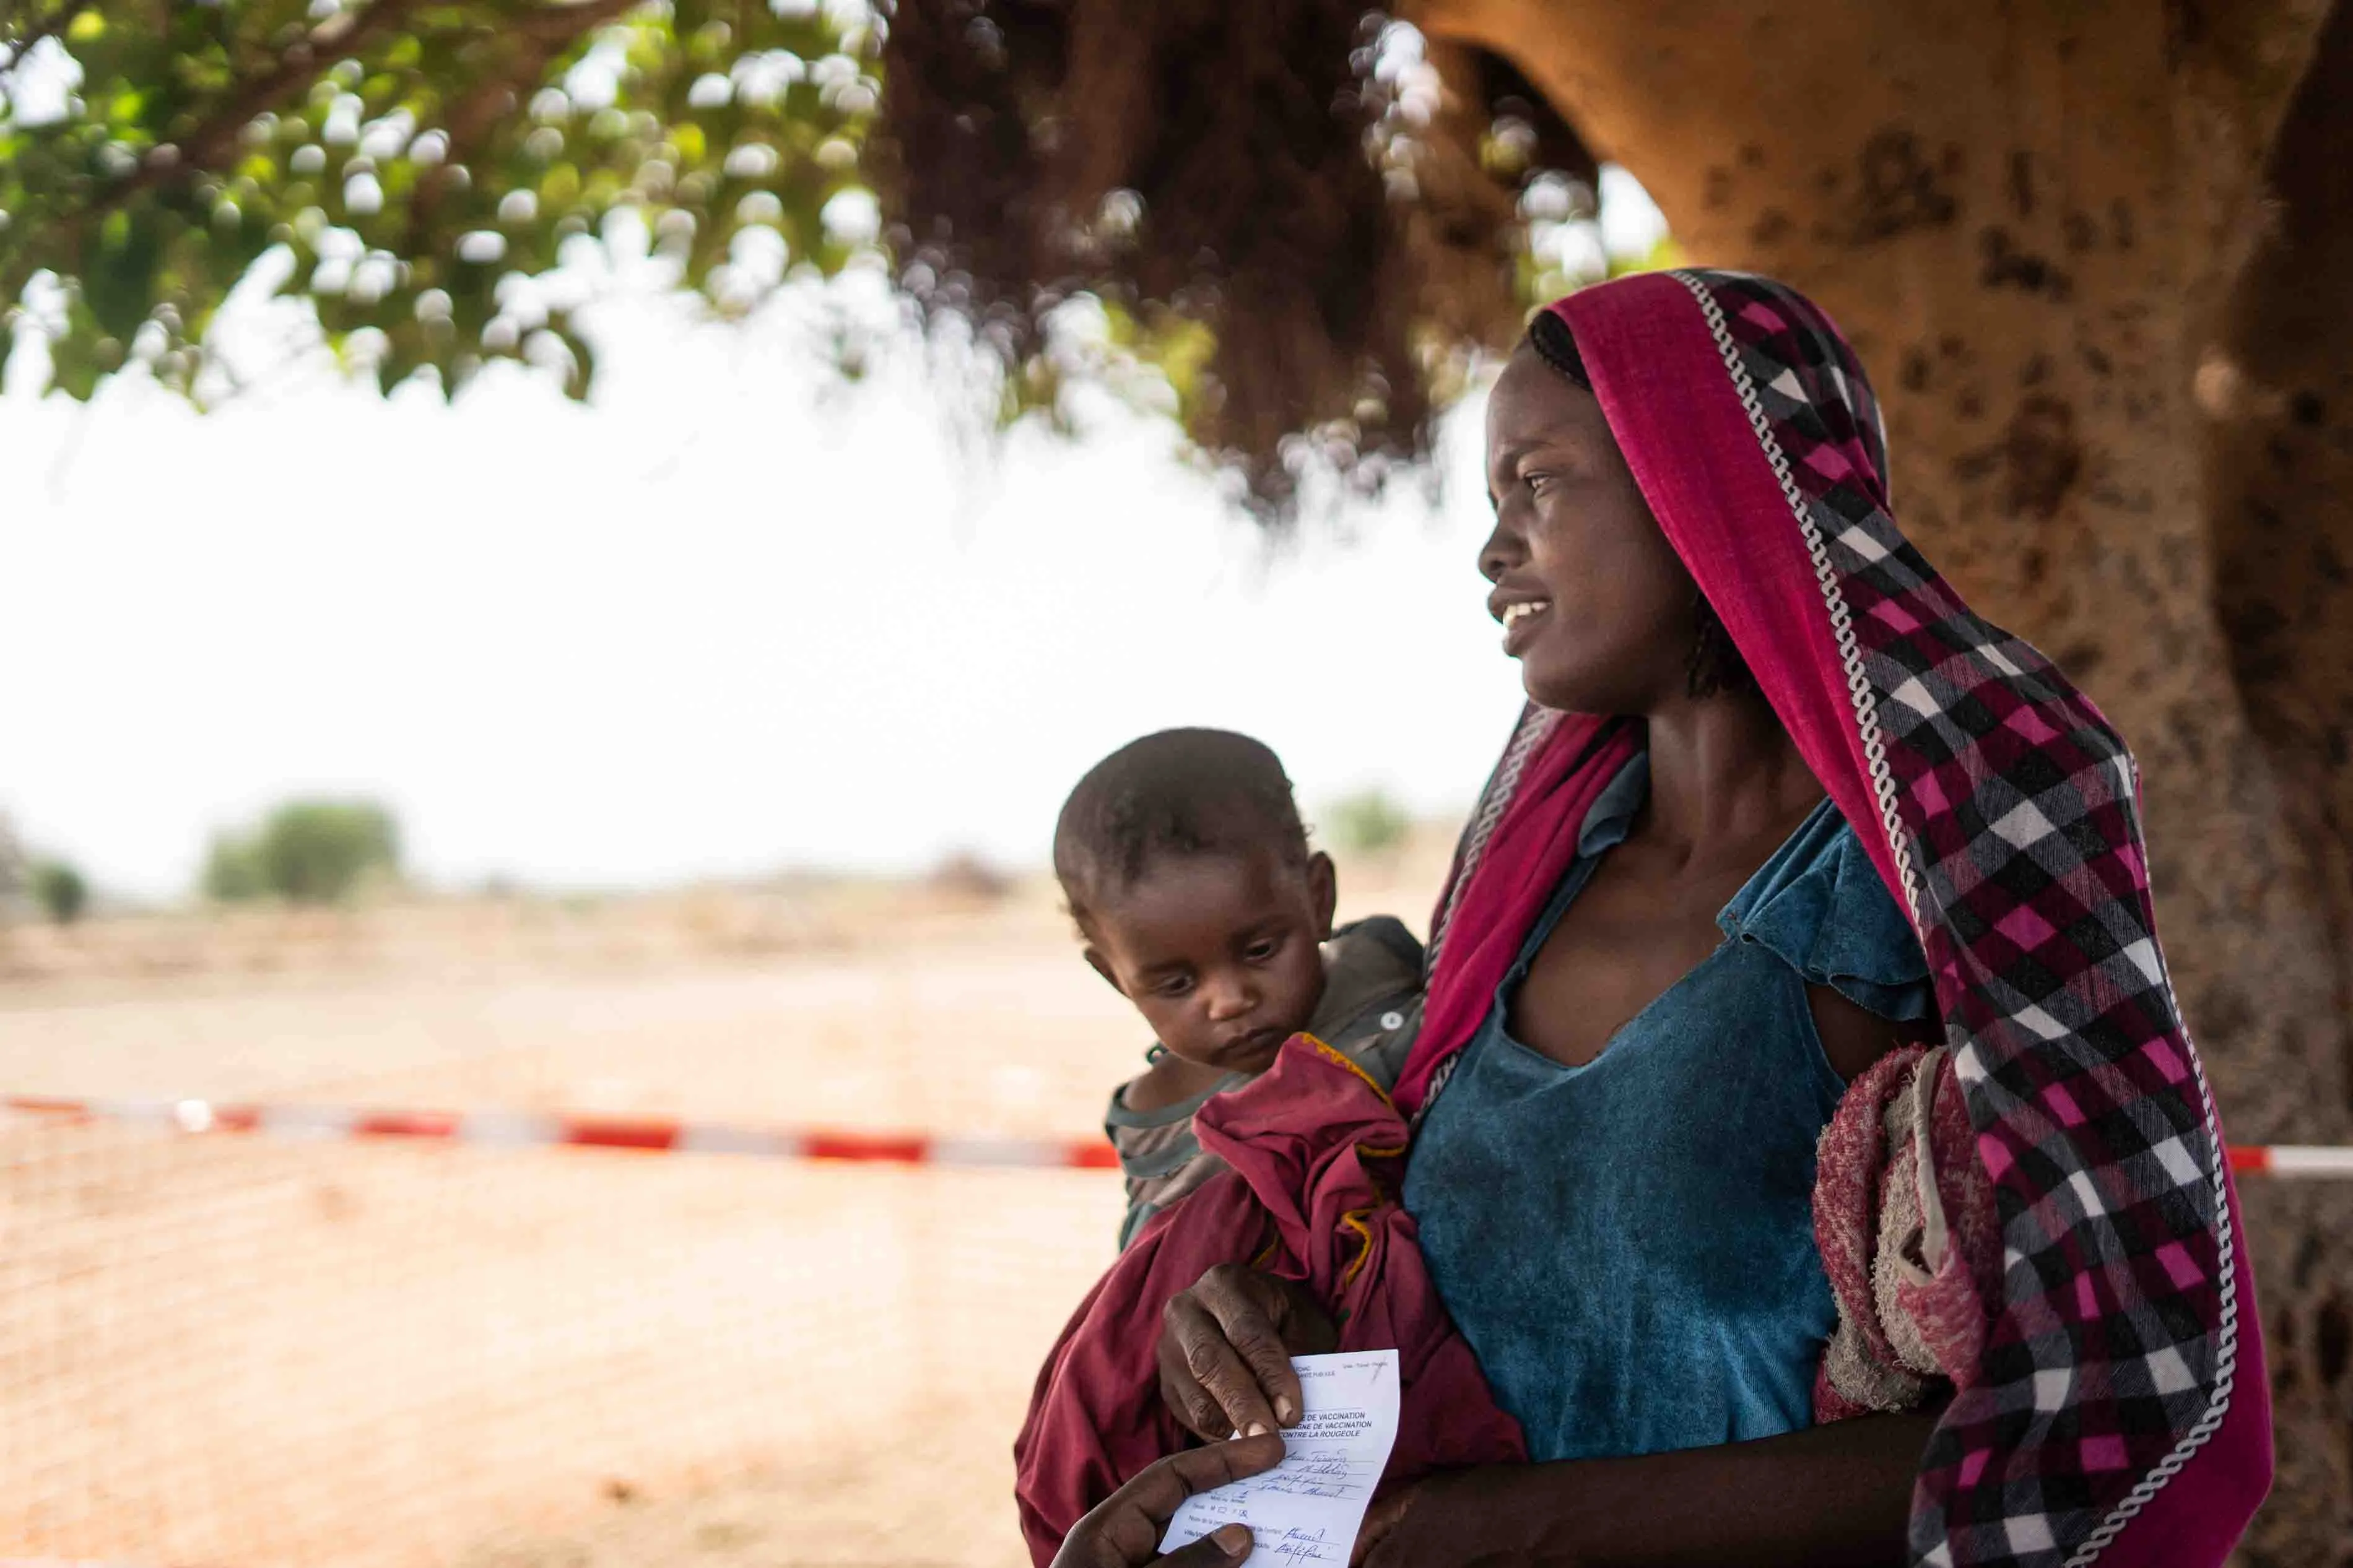 Zara Ahmat, 20, with her baby, Aba Abdulaziz, 1, just vaccinated against measles, Chad, 2019.